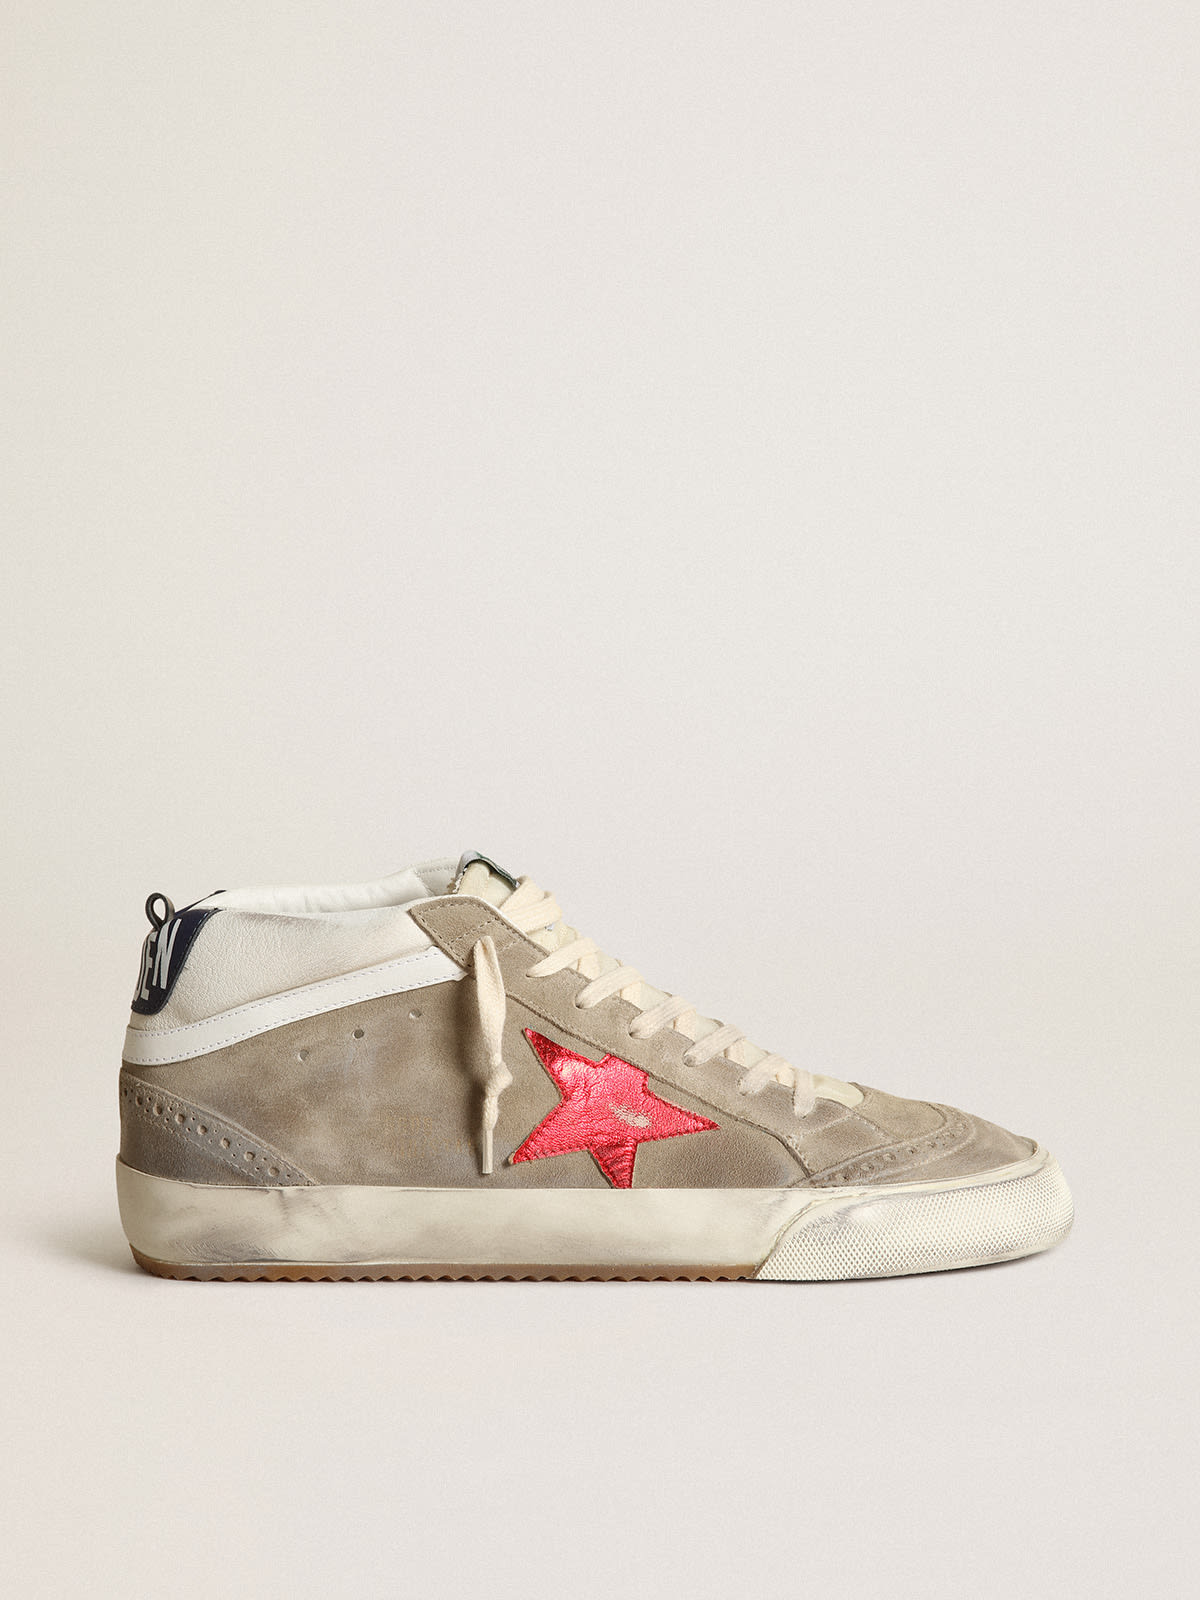 Golden Goose - Men's Mid Star in dove gray suede with red leather star in 